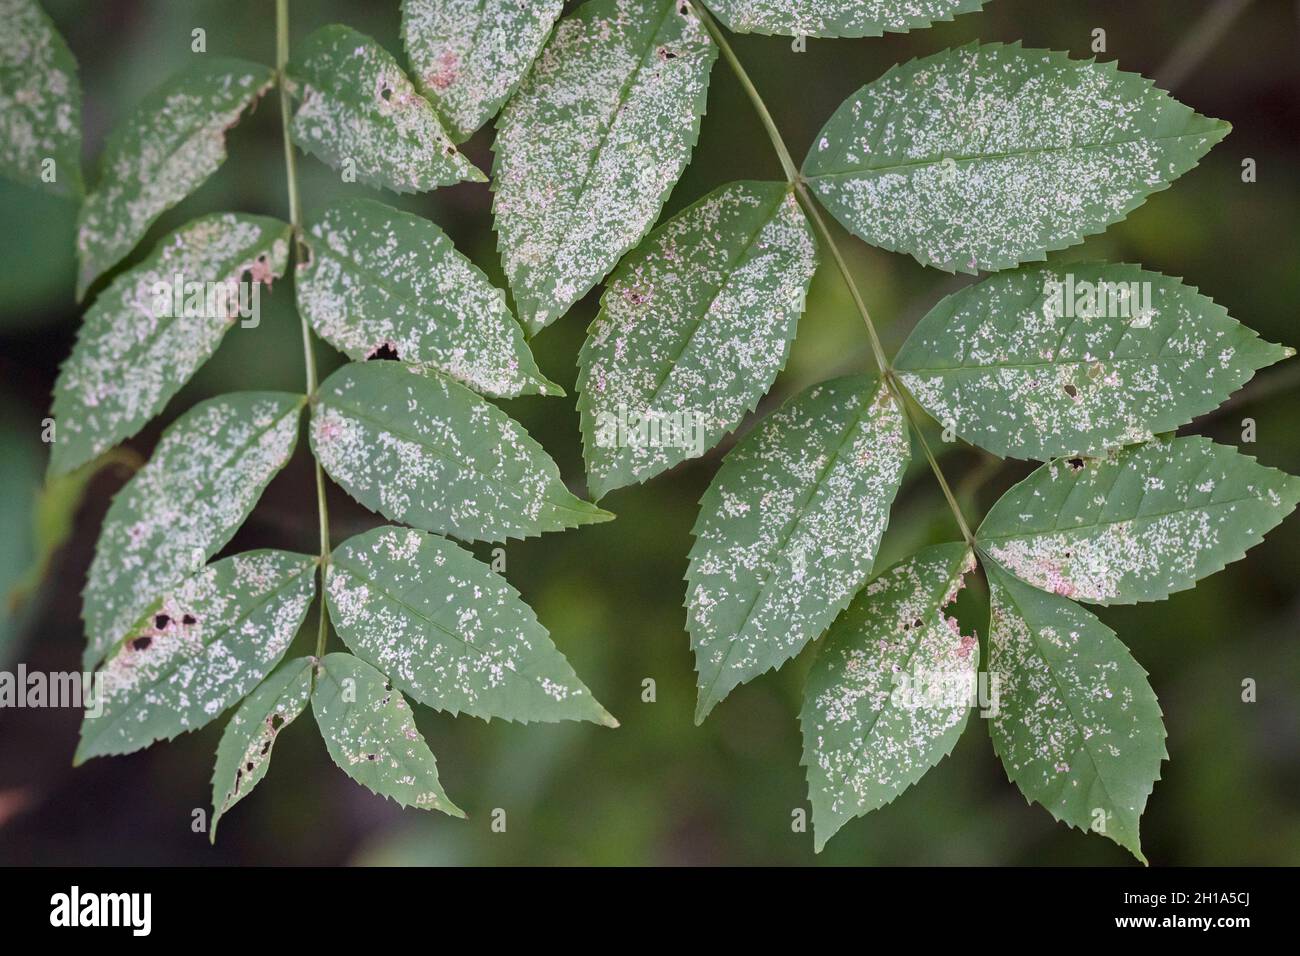 Powdery Mildew on leaves caused by fungus of the species Erysiphales. Stock Photo